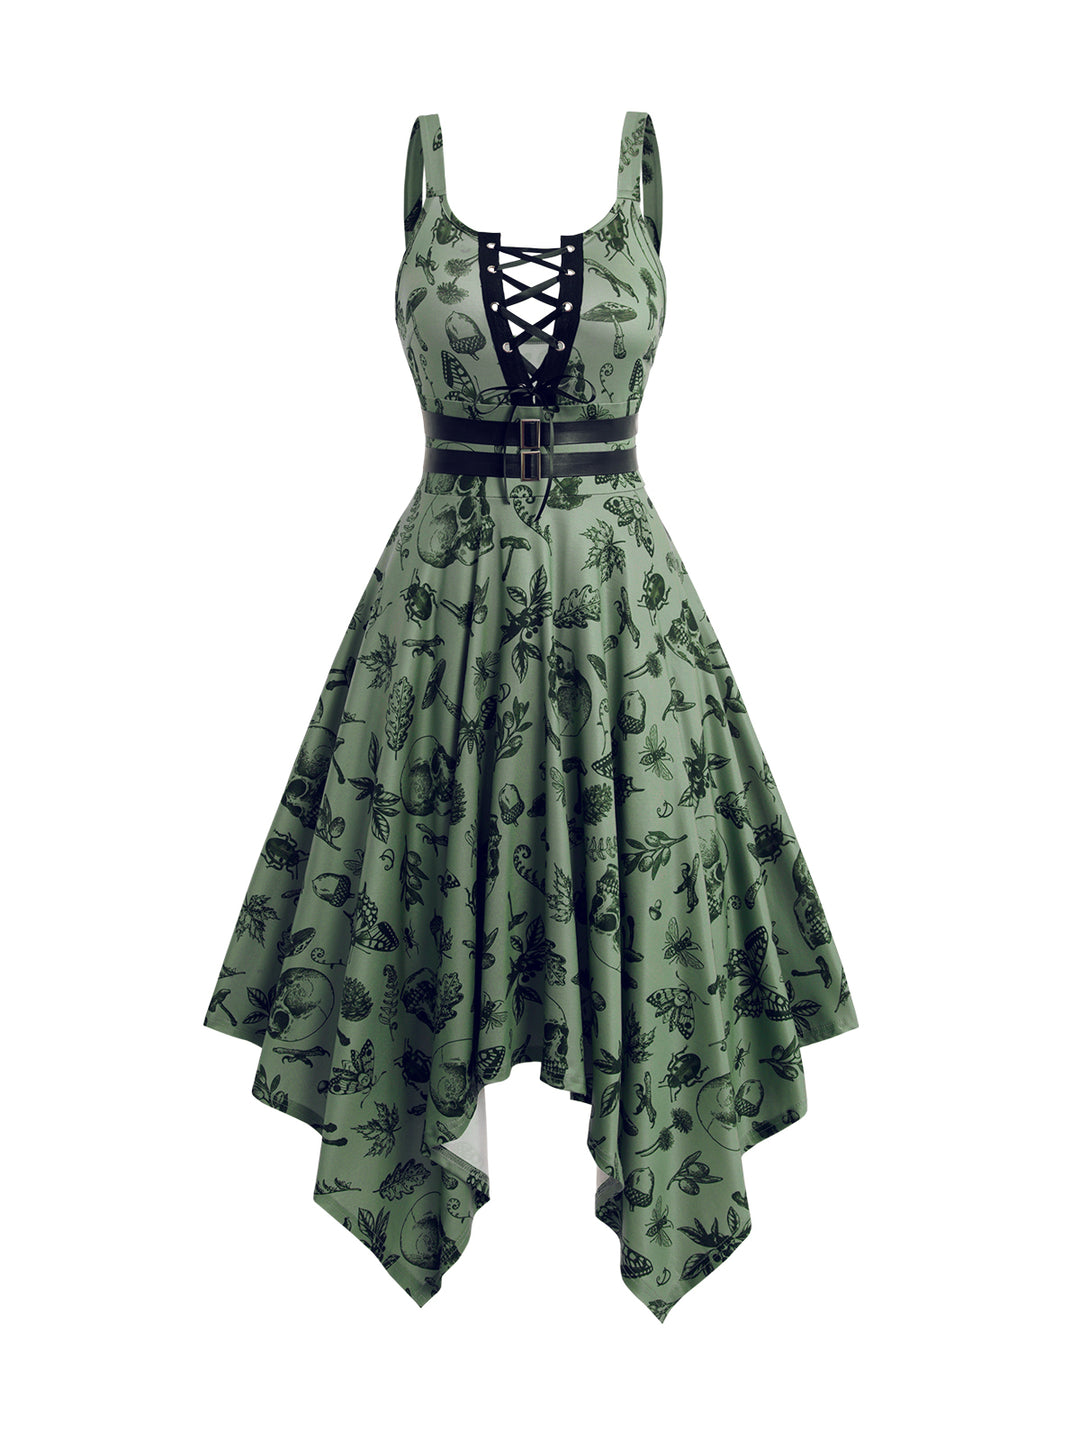 Allover Gothic Skull Print Lace Up Cami Dress